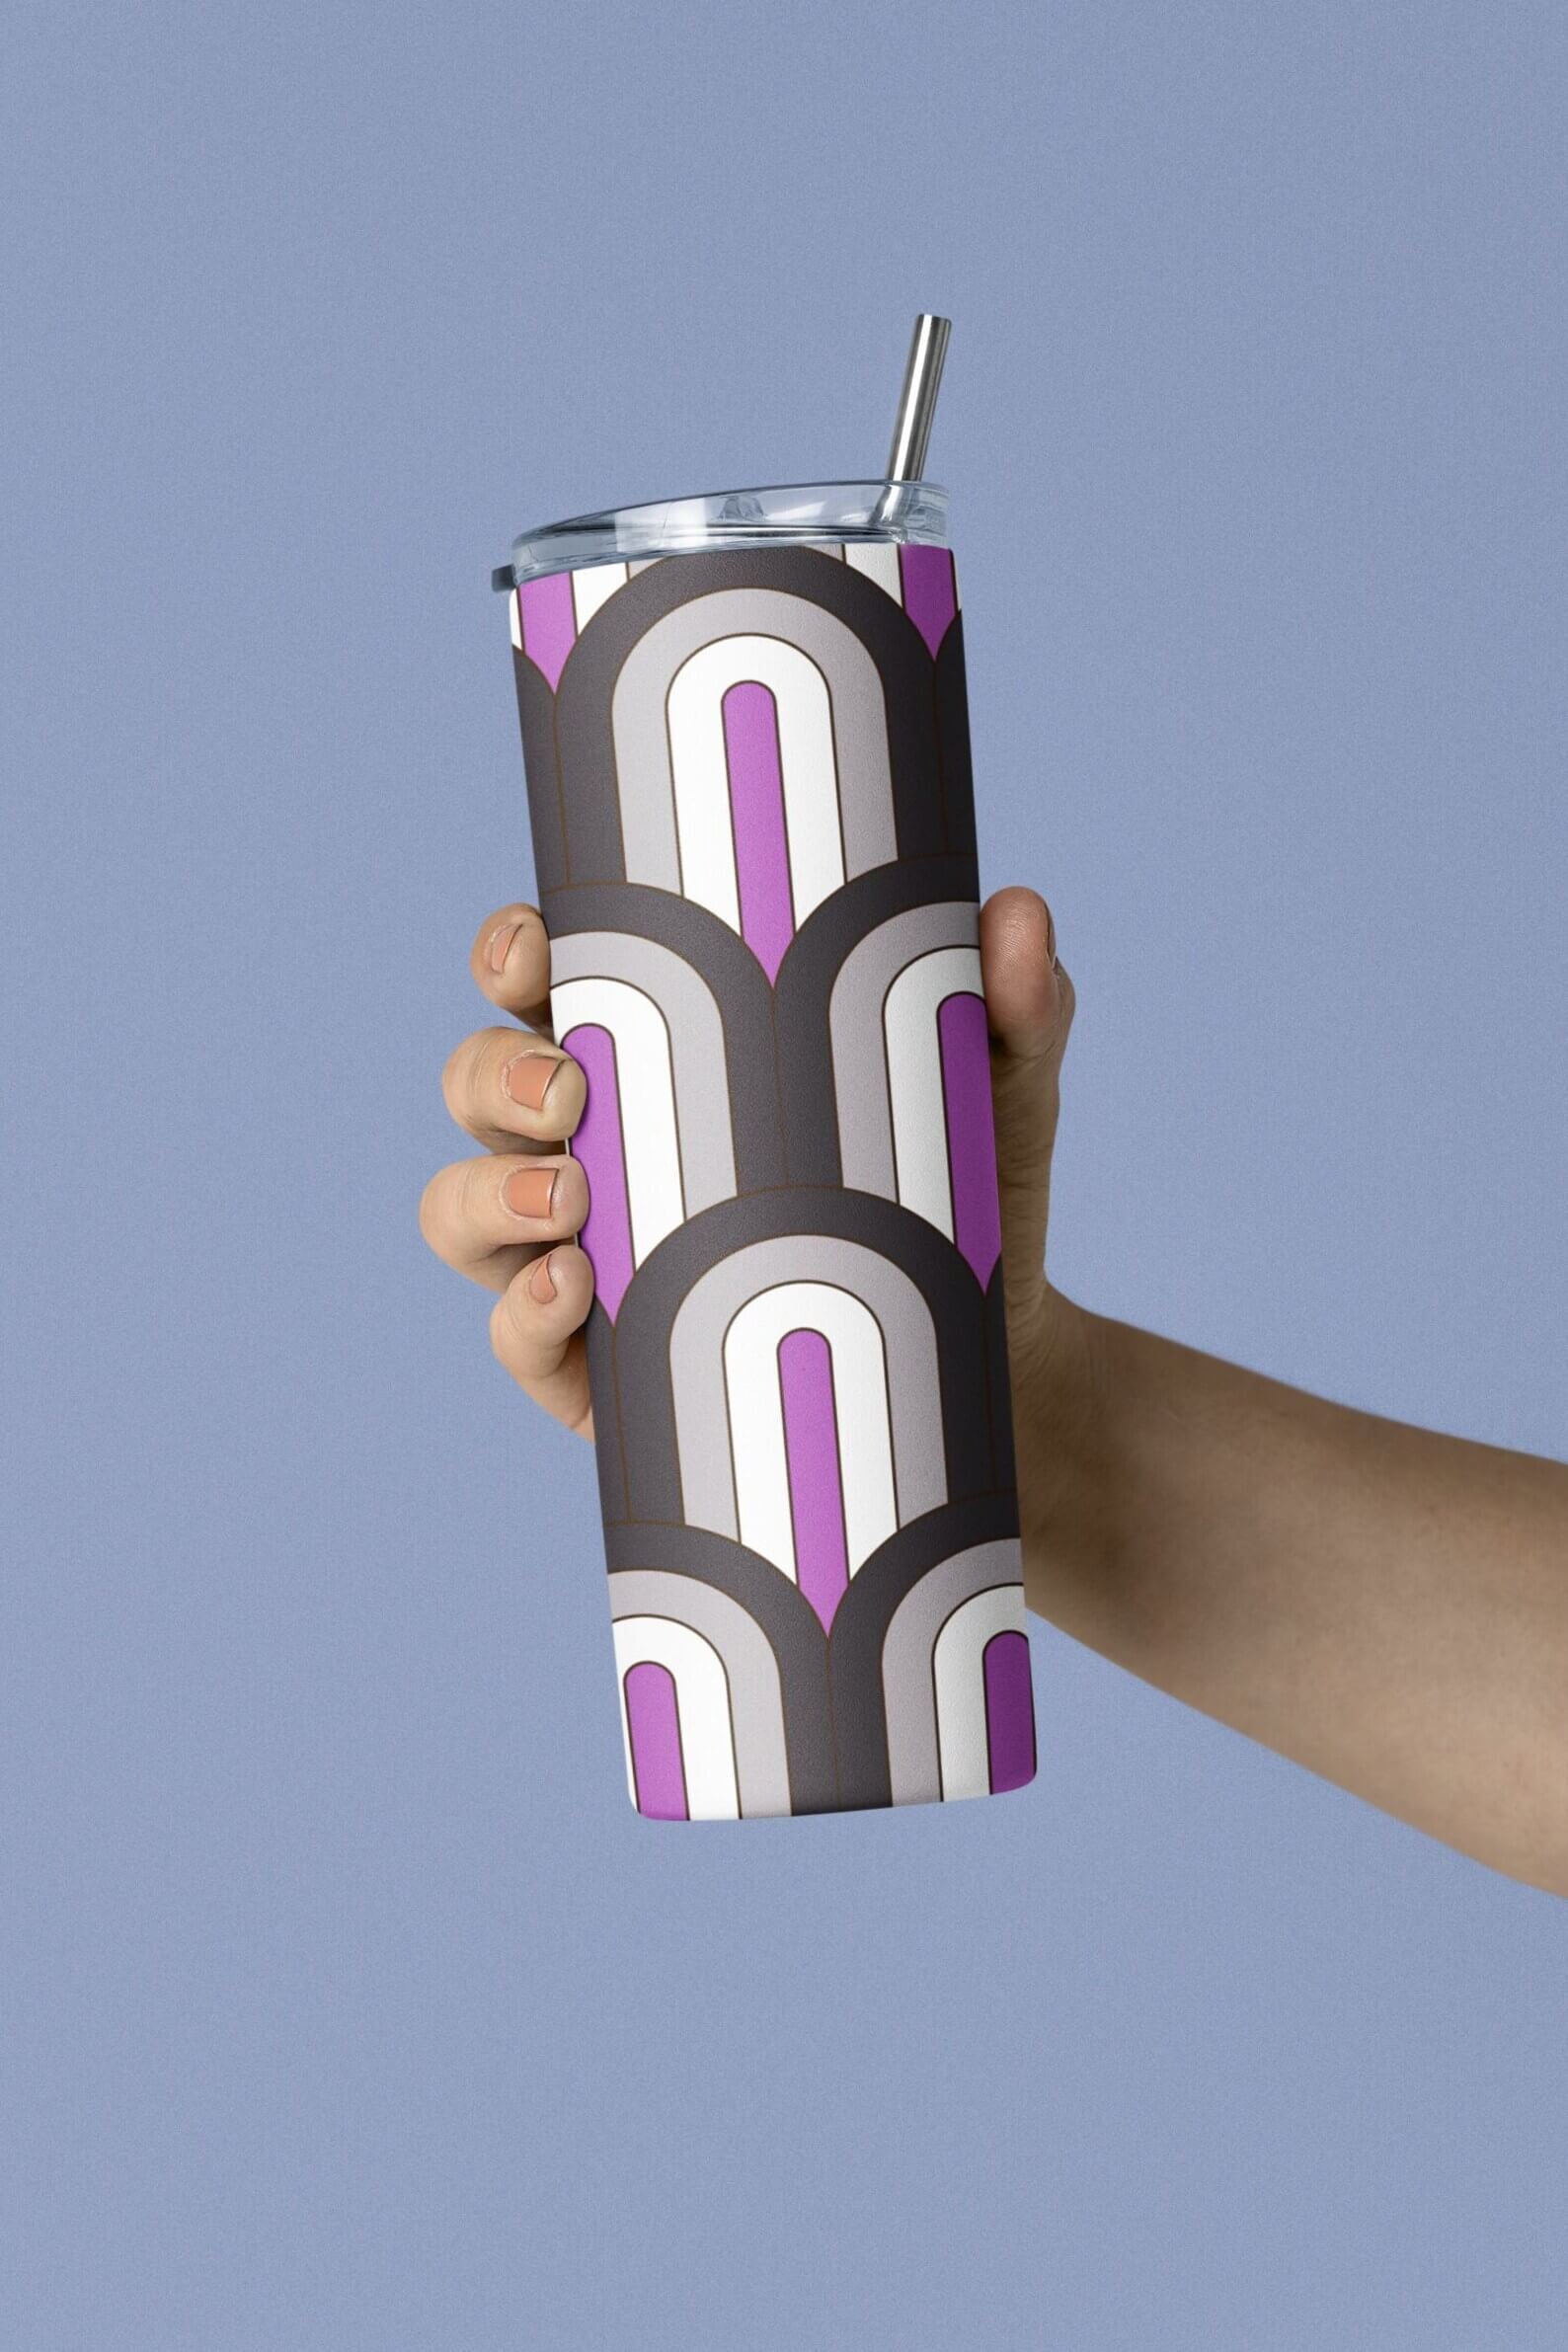 A drink tumbler in the colors of the asexual flag